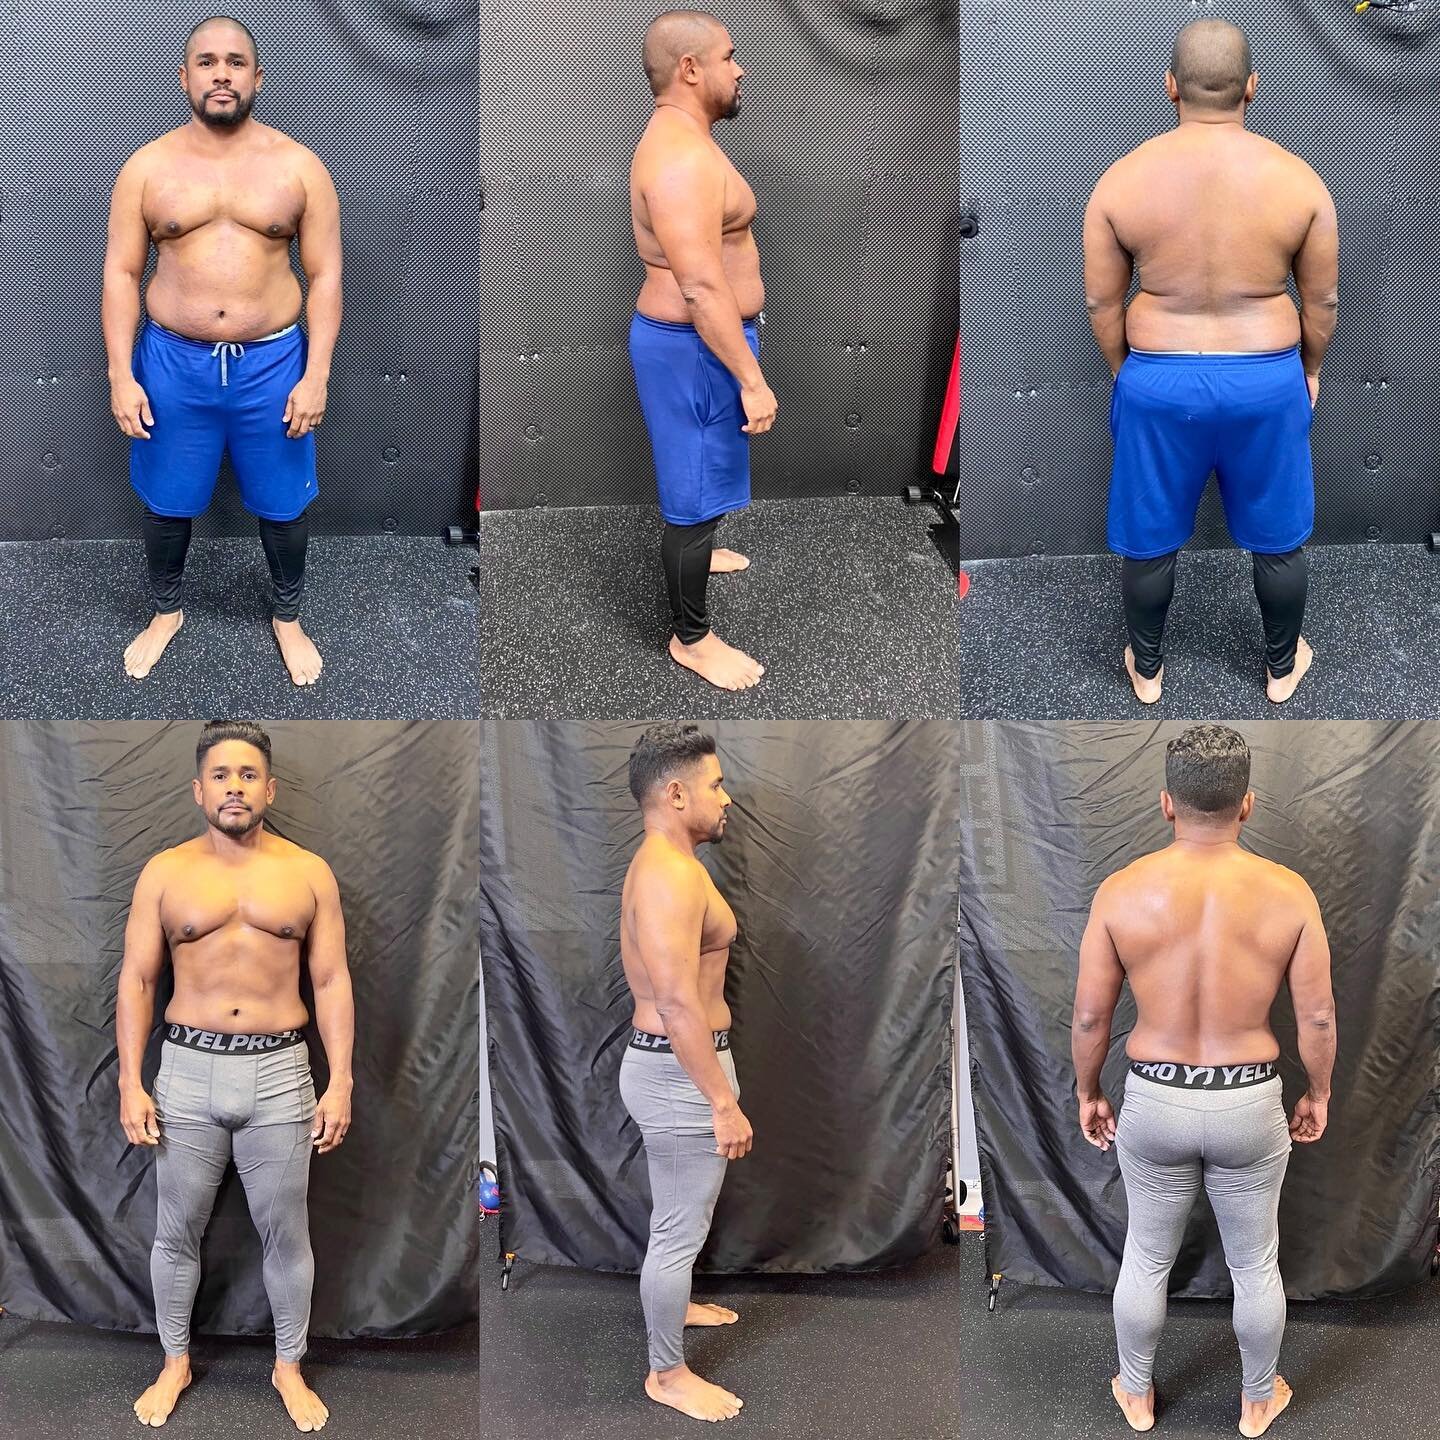 Pain, Gait &amp; Physique Gains with @functionalpatterns @naudiaguilar 

Barjes - @barj3s 
BEFORE: 9/12/2020 
Age: 43
❌Unable to sprint due to hip pain 
❌Chronic knee pain, considering surgery
❌Excess body fat - 217lbs 
❌hyper-flacid core &amp; hips 